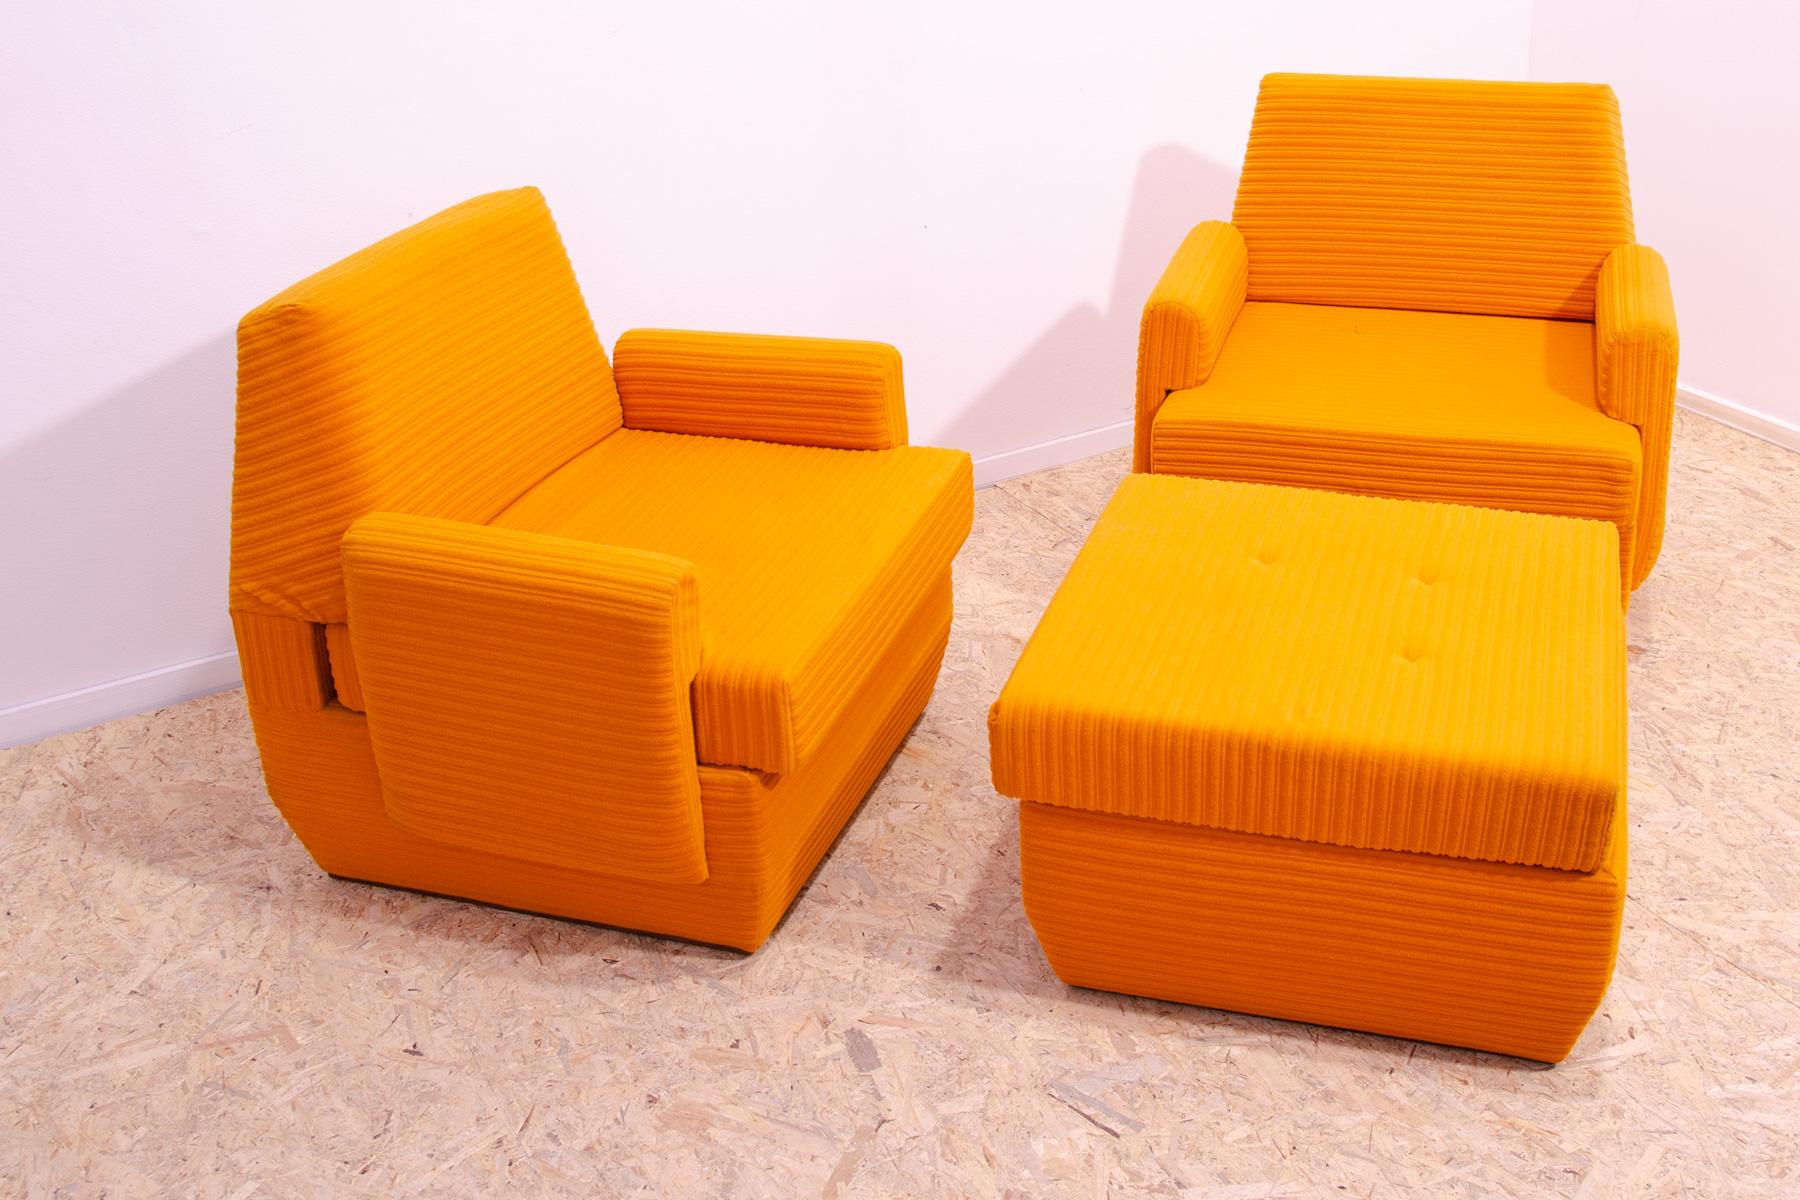 This set was a part of a living room set made by JITONA company in the 1970´s. It´s consist of two armchairs and one pouffe. You can also simply turn it into a bed.
It represent a typical example of furniture design of the 1970/1980s years of the